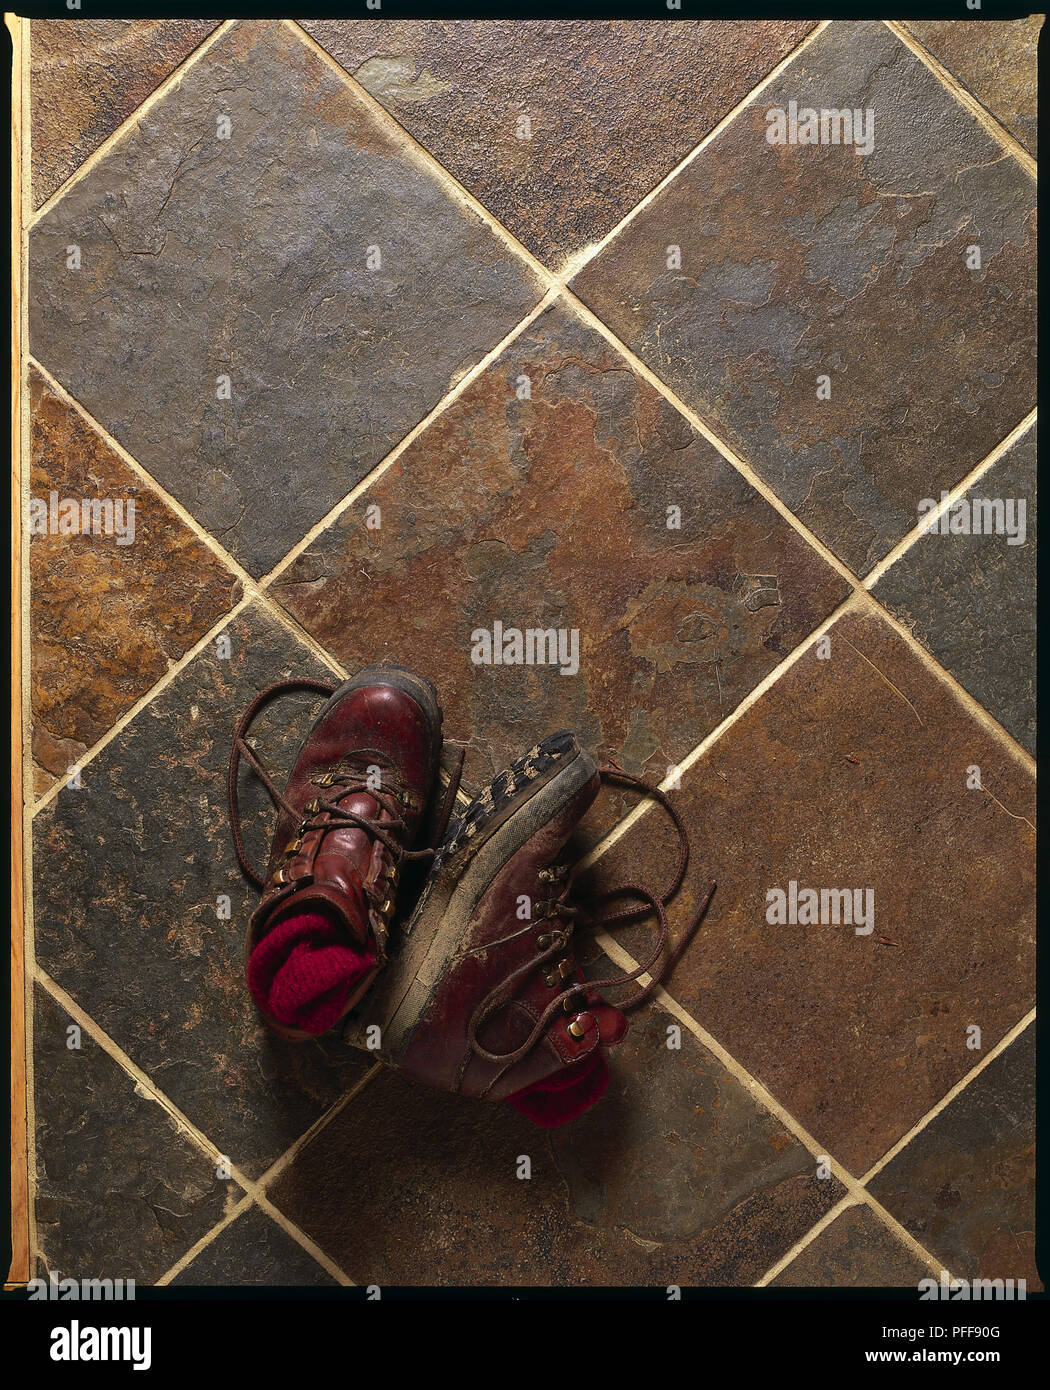 Dirty Hiking Boots on Slate Kitchen Floor Stock Photo